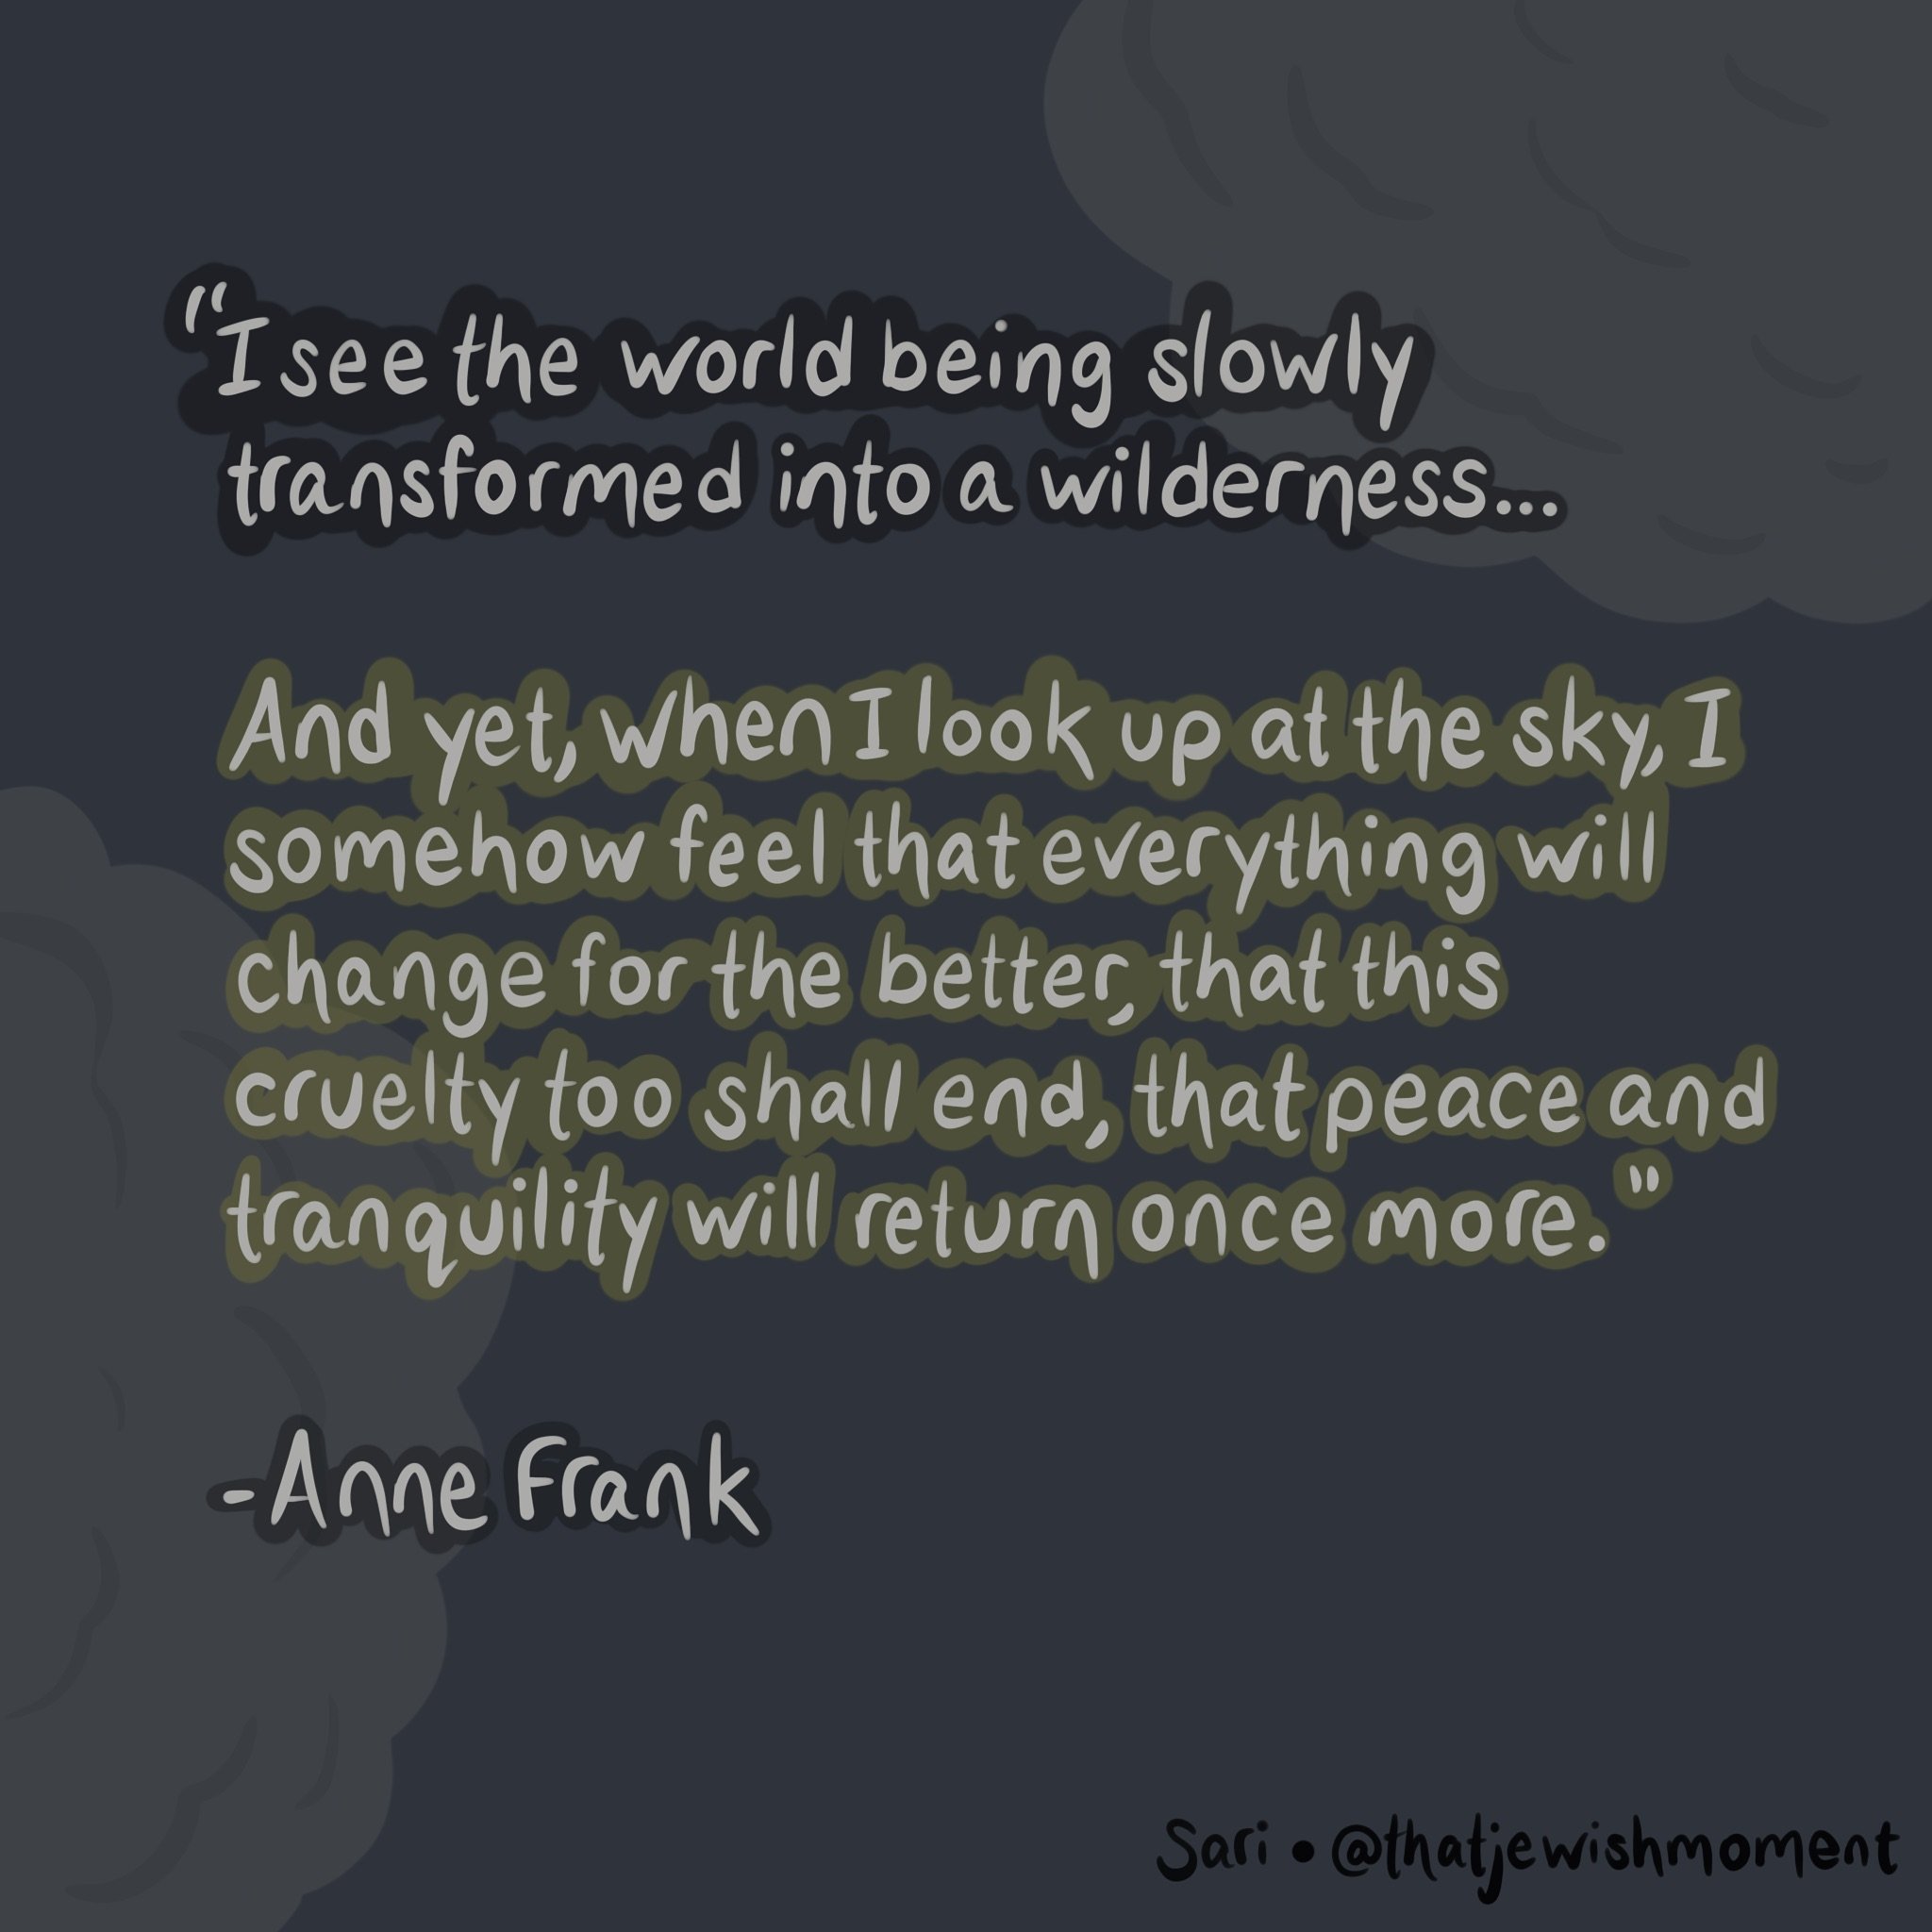 On this heavy day of Yom Hashoah, we remember Anne Frank and the 6 million who perished. And let&rsquo;s hold onto hope for better times soon. 

#yomhashoah #annefrank #holocaustremembranceday